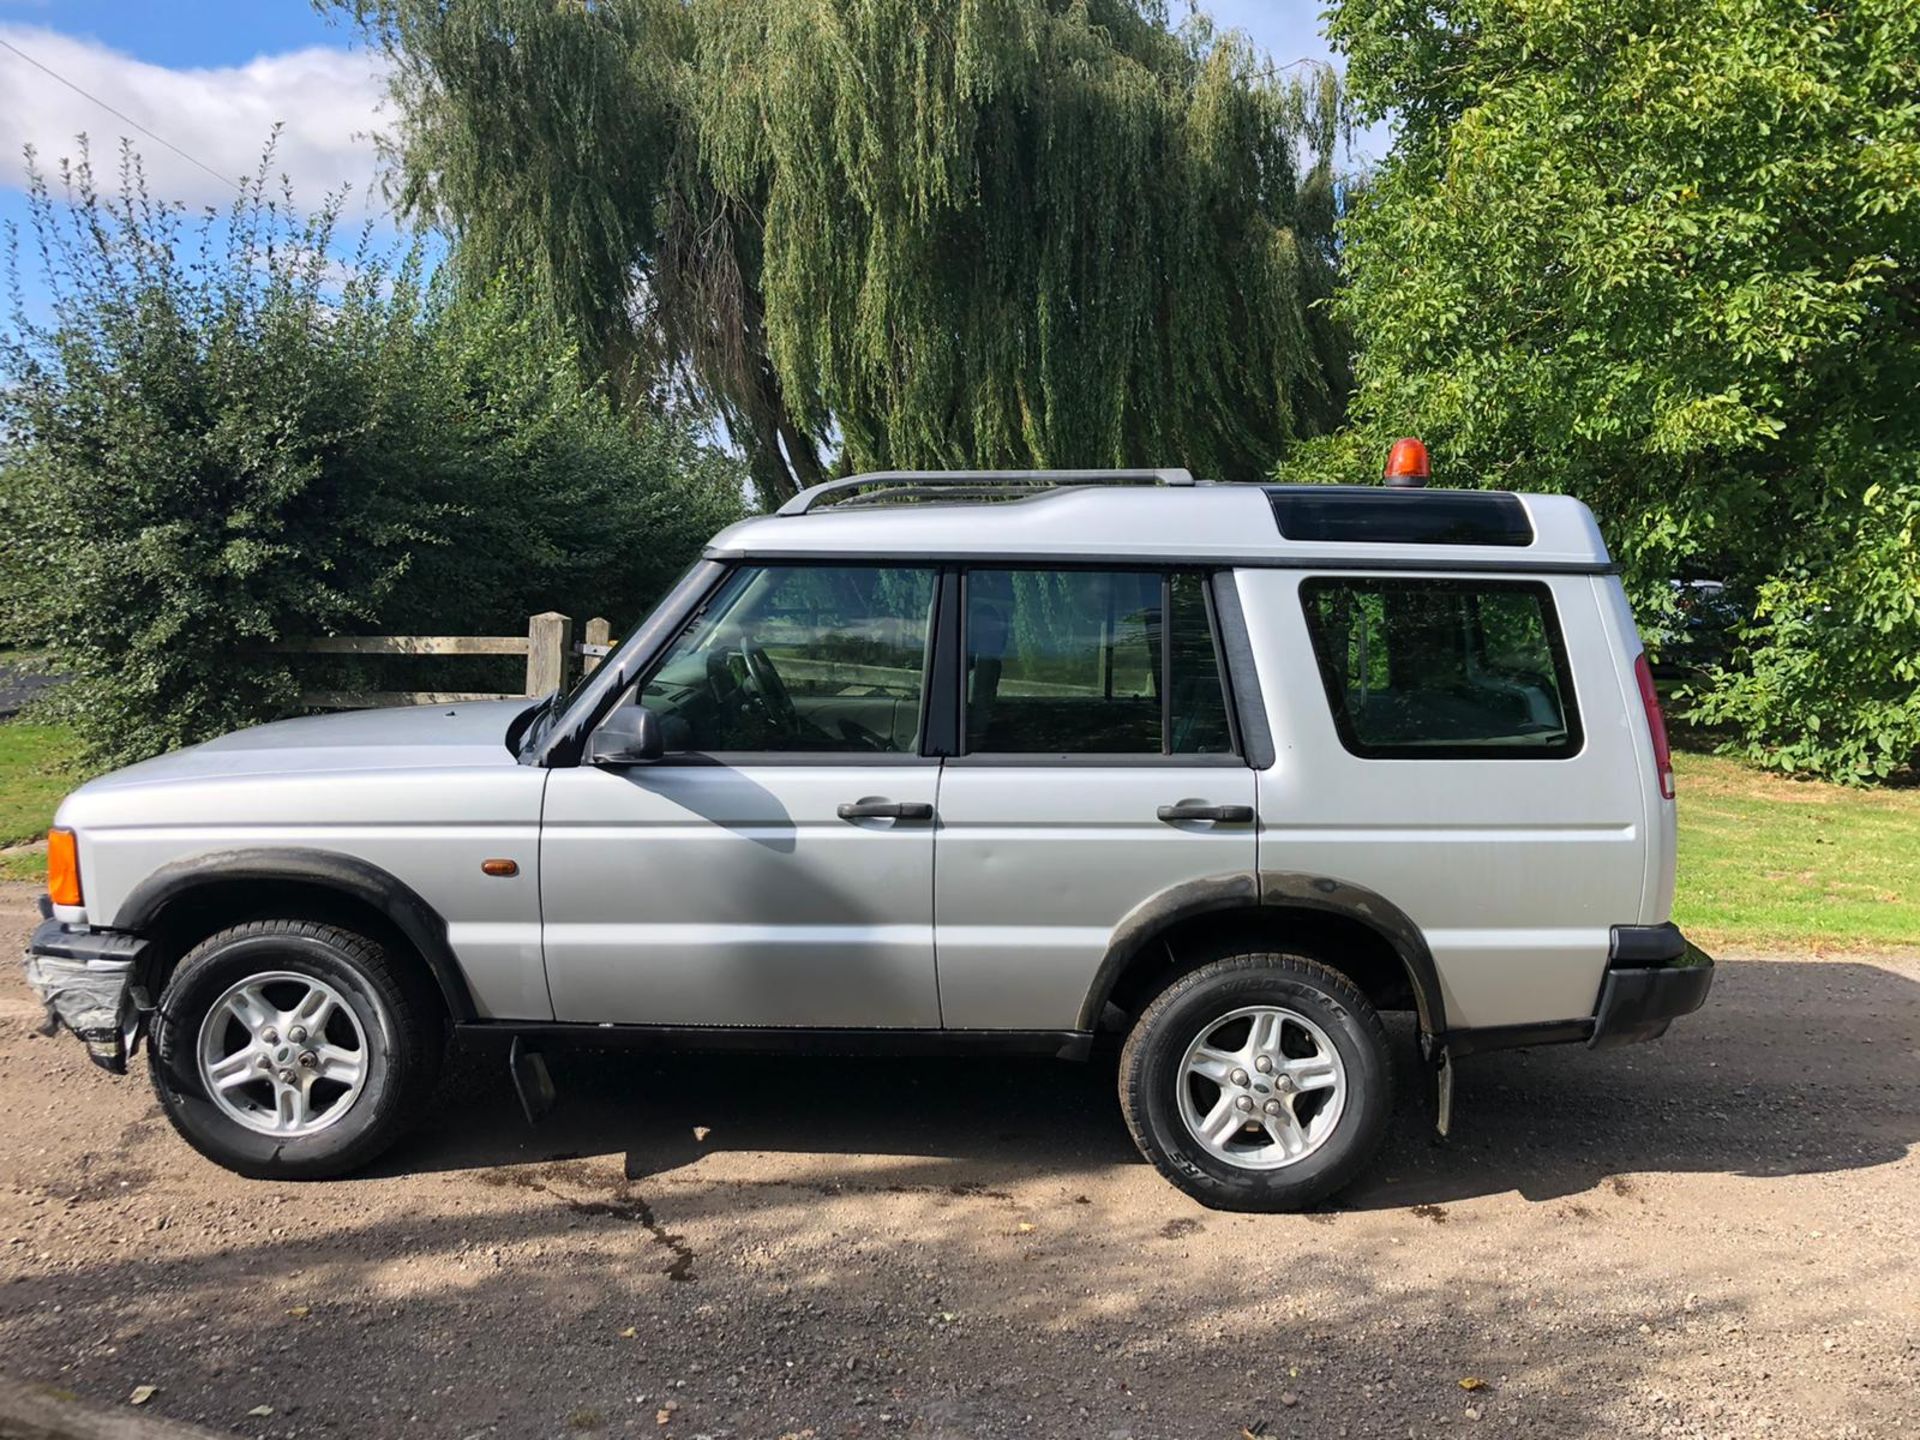 2002 LAND ROVER DISCOVERY TD5 GS SILVER ESTATE, 2.5 DIESEL ENGINE, 201,163 MILES *NO VAT* - Image 4 of 17